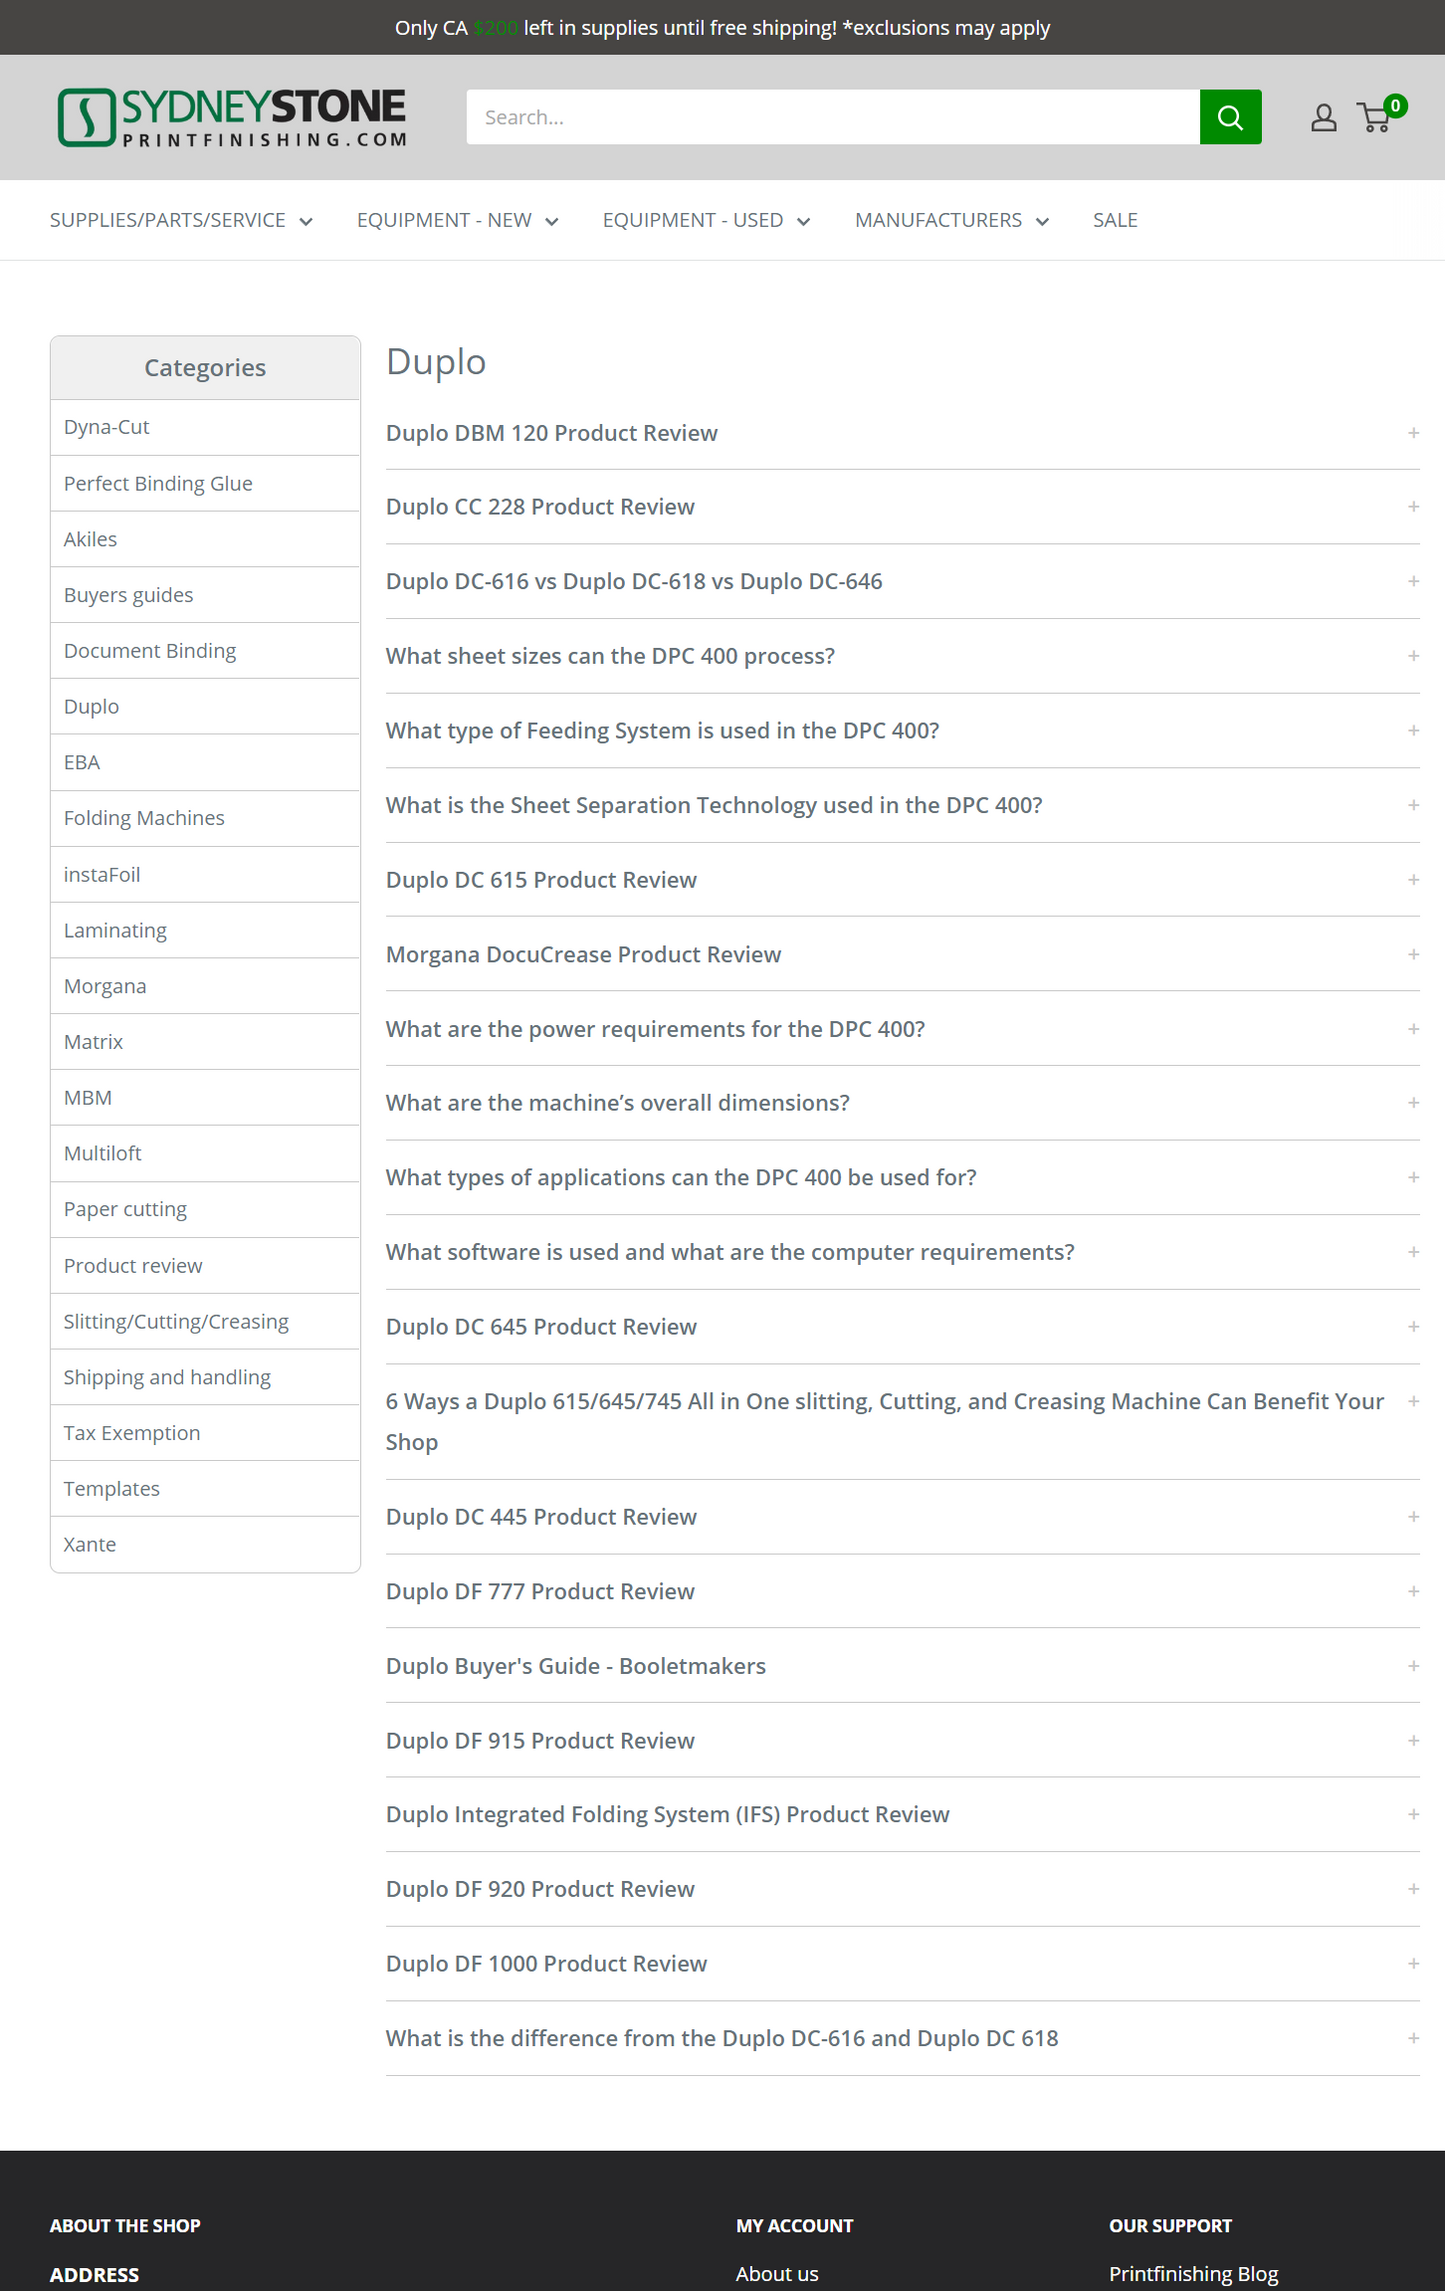 Shopify Categorized FAQ Page holding 500 FAQs - 2022